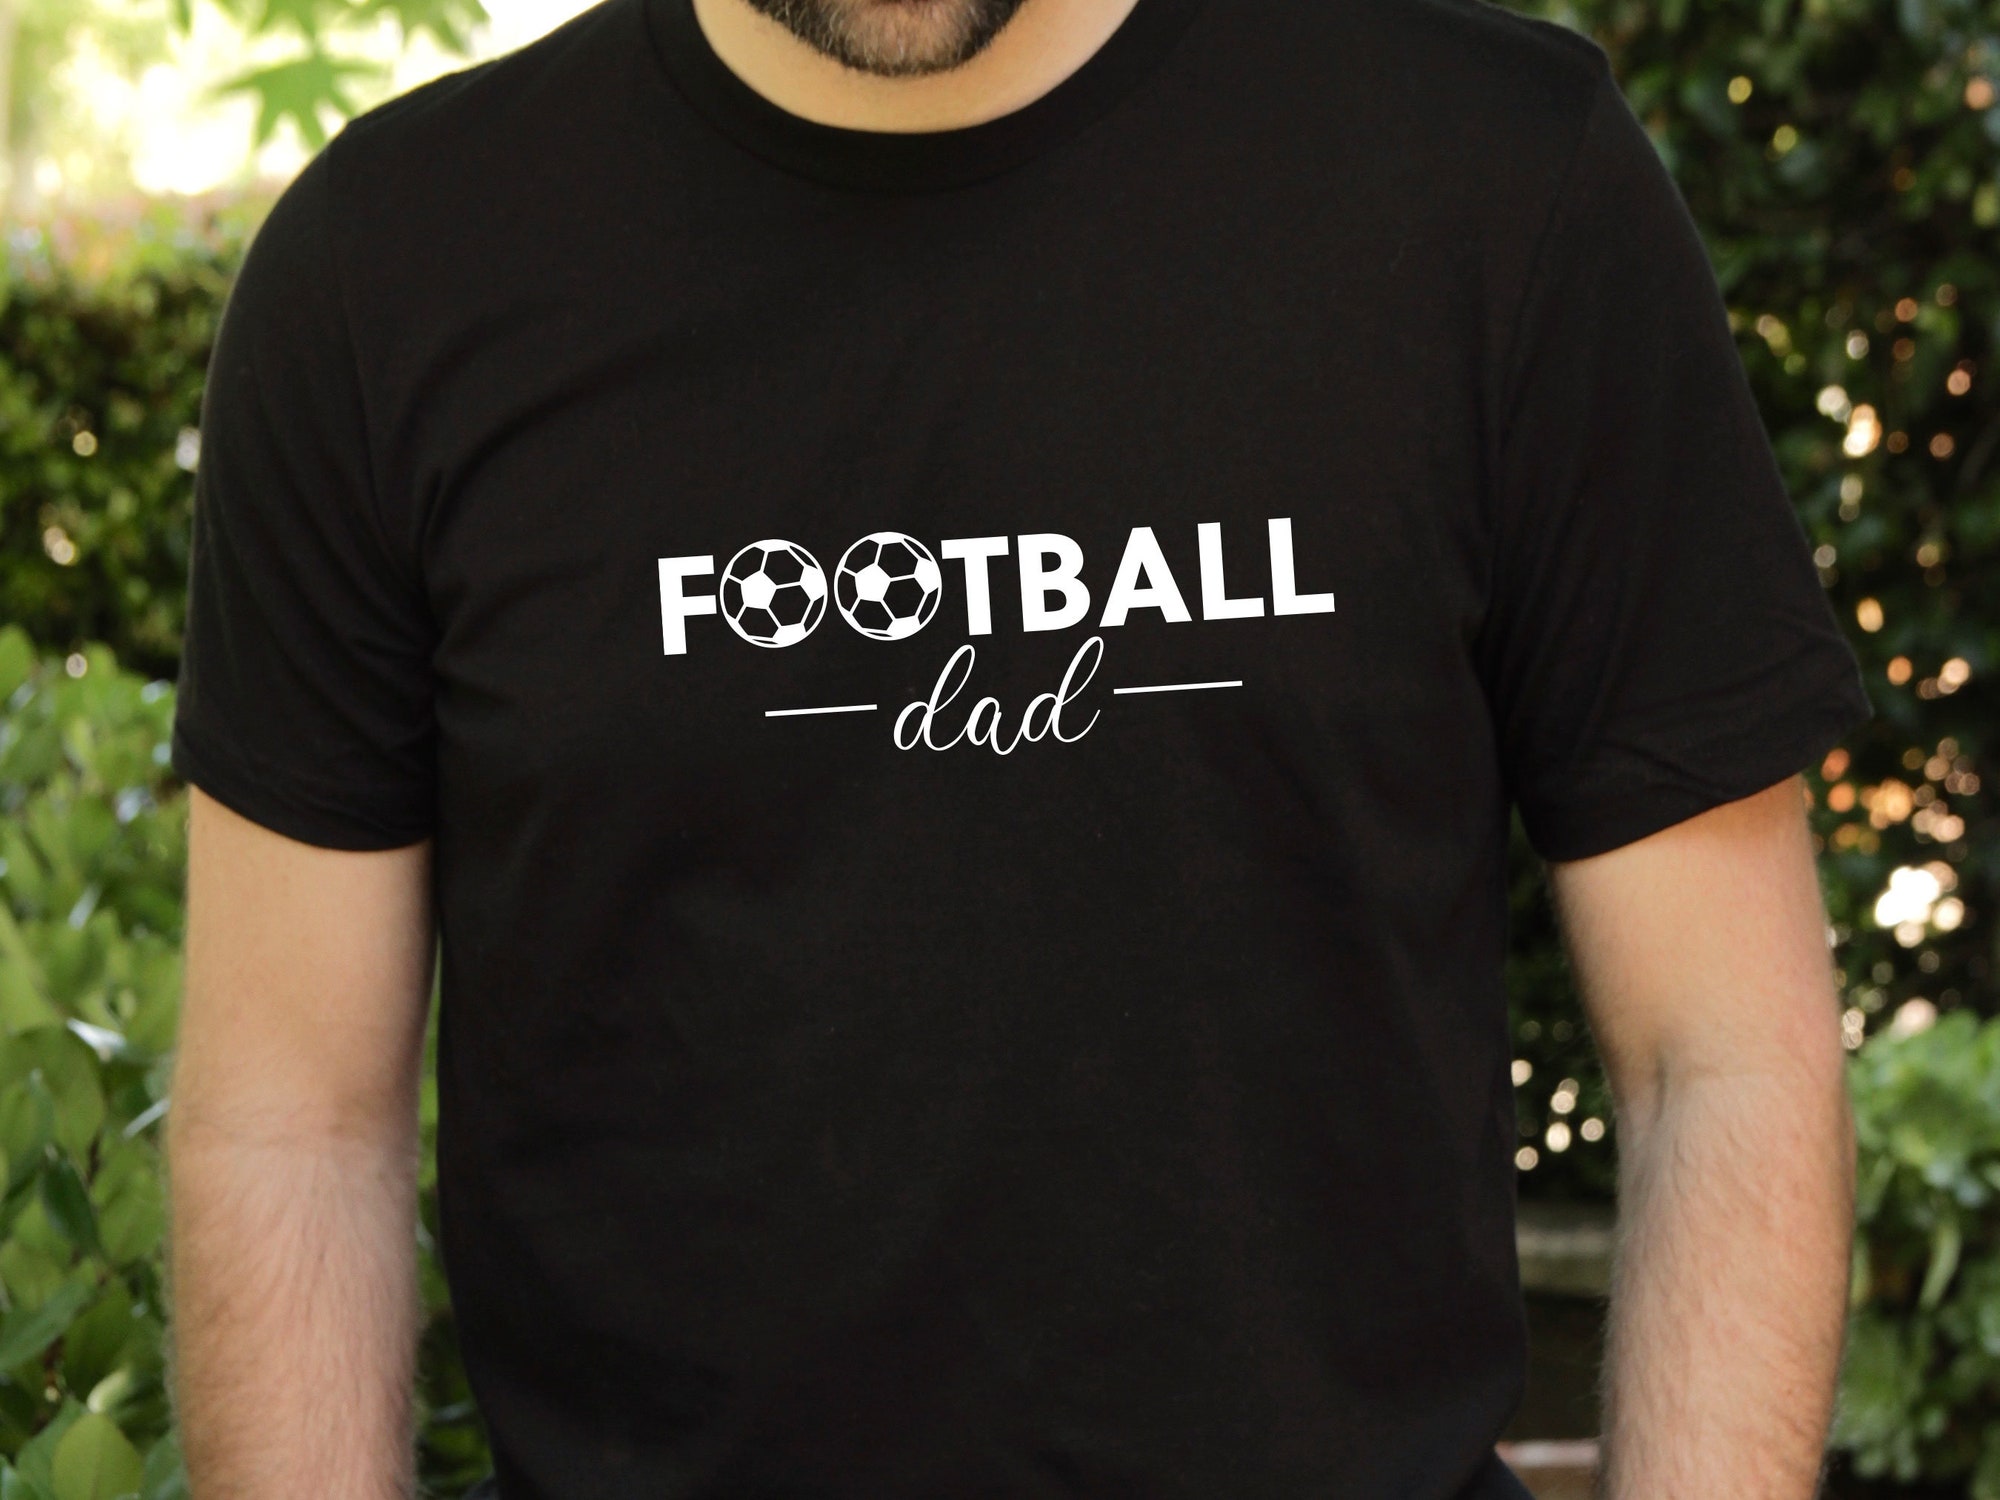 Discover Football Dad T-Shirt, Funny Football T-Shirt, Cute Father's DayT-Shirt, Sports T-Shirt, Game Day T-Shirt